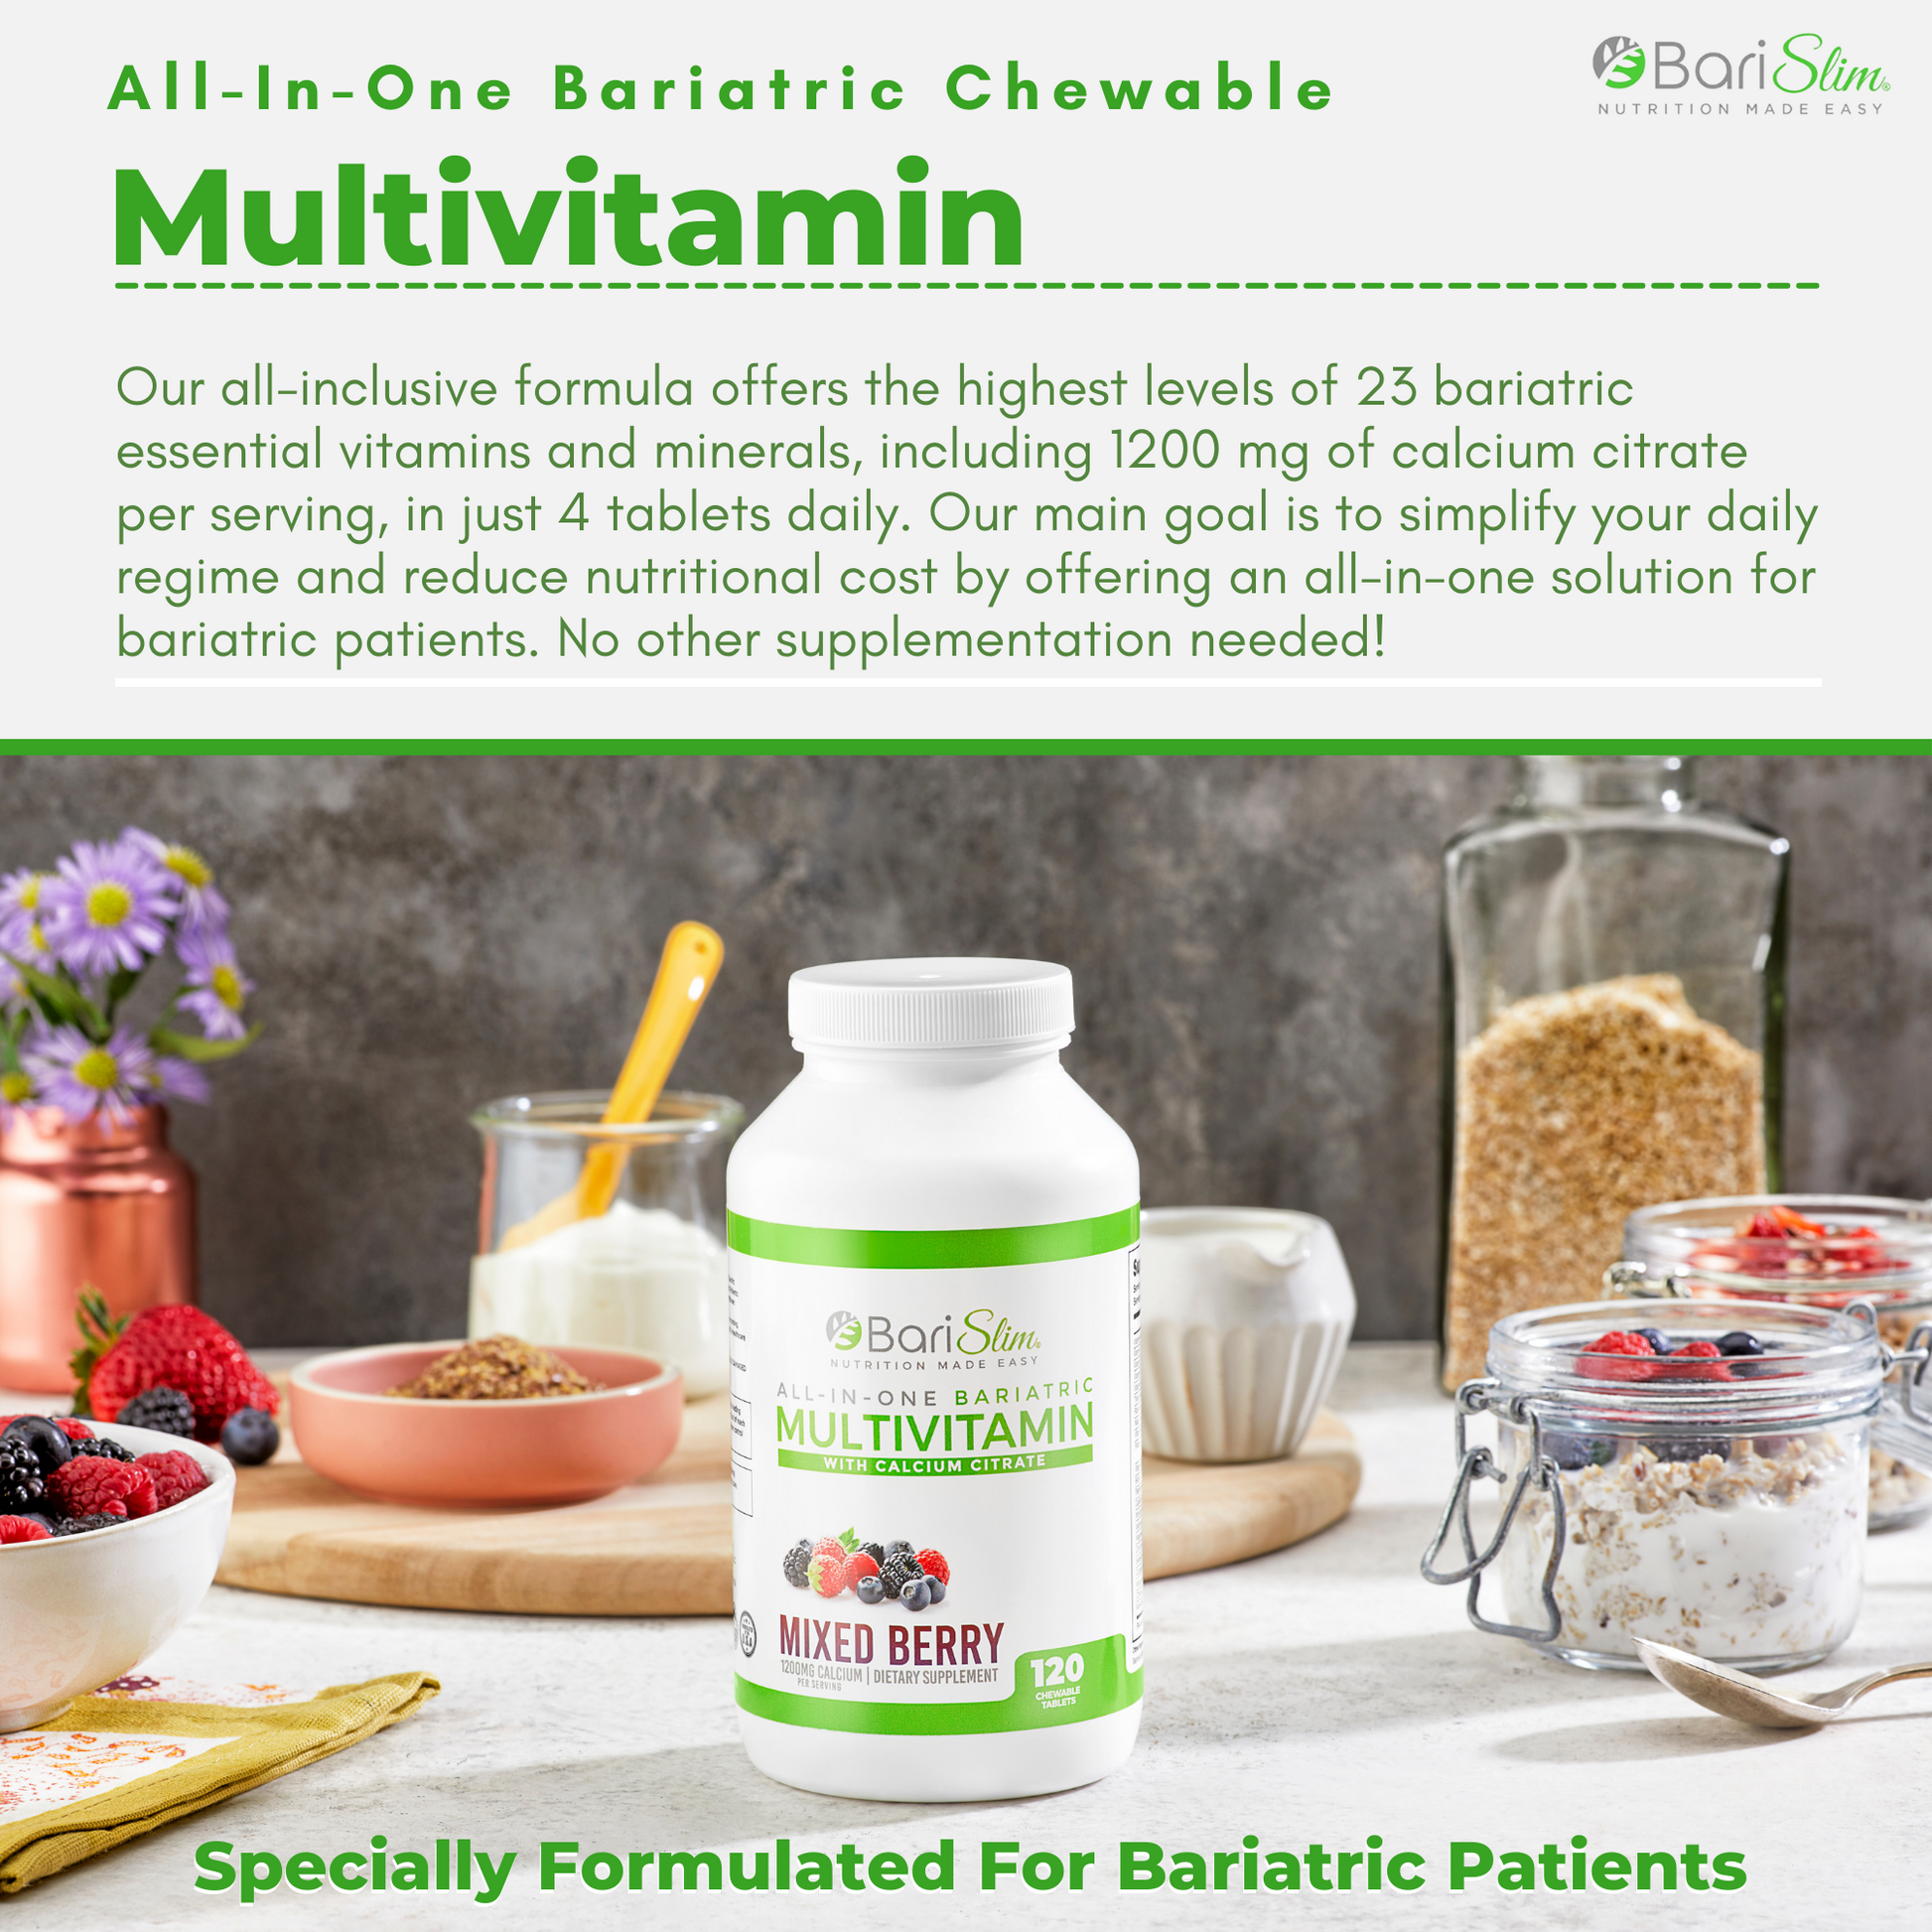 All-in-one bariatric chewable tablet with 1200mg of calcium citrate